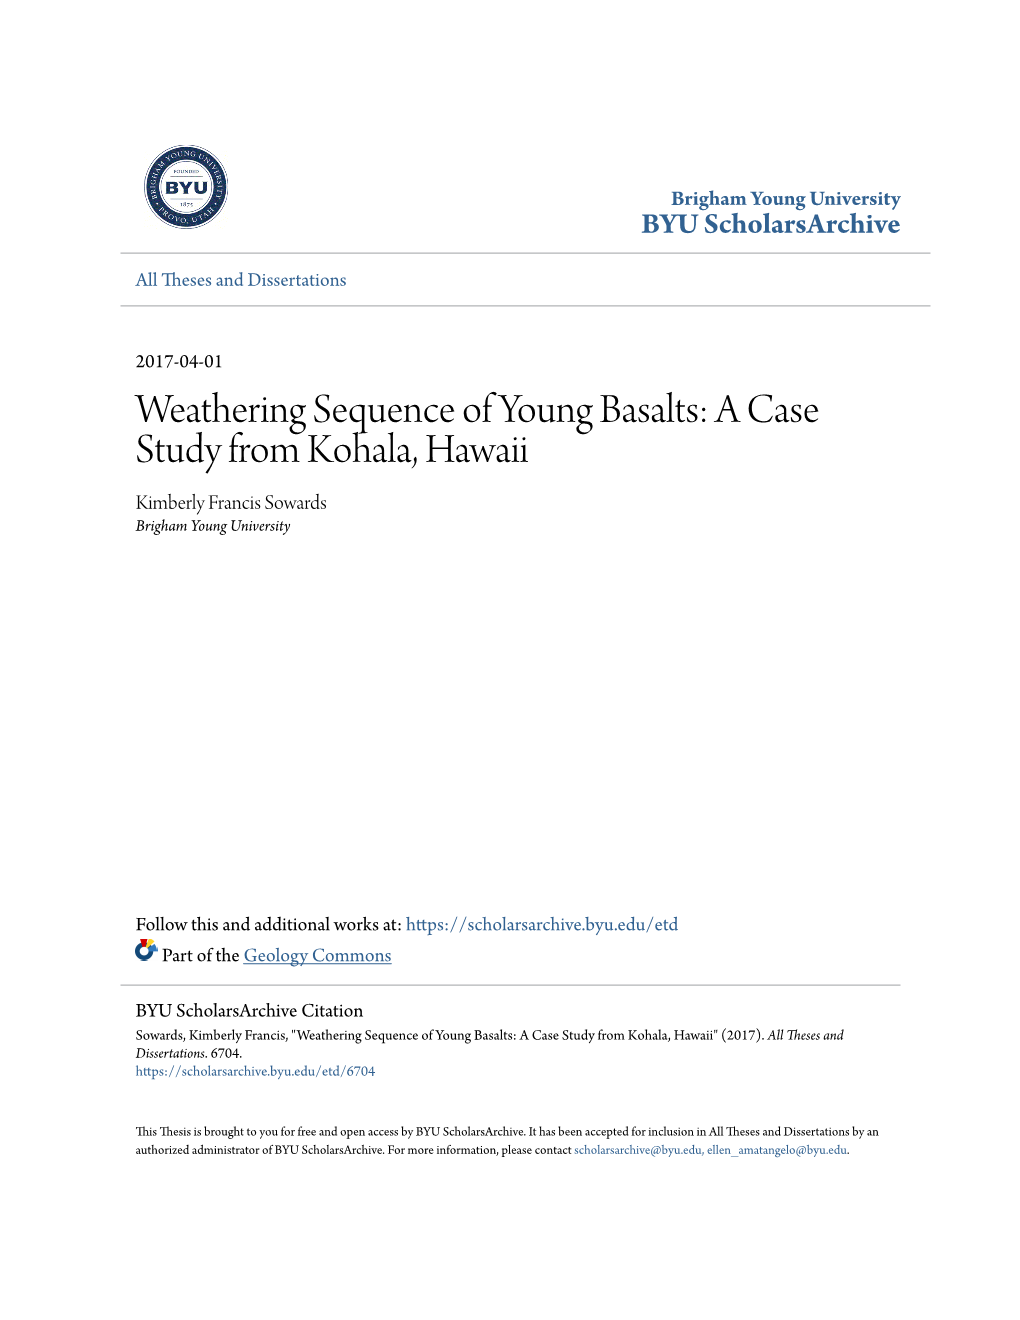 Weathering Sequence of Young Basalts: a Case Study from Kohala, Hawaii Kimberly Francis Sowards Brigham Young University